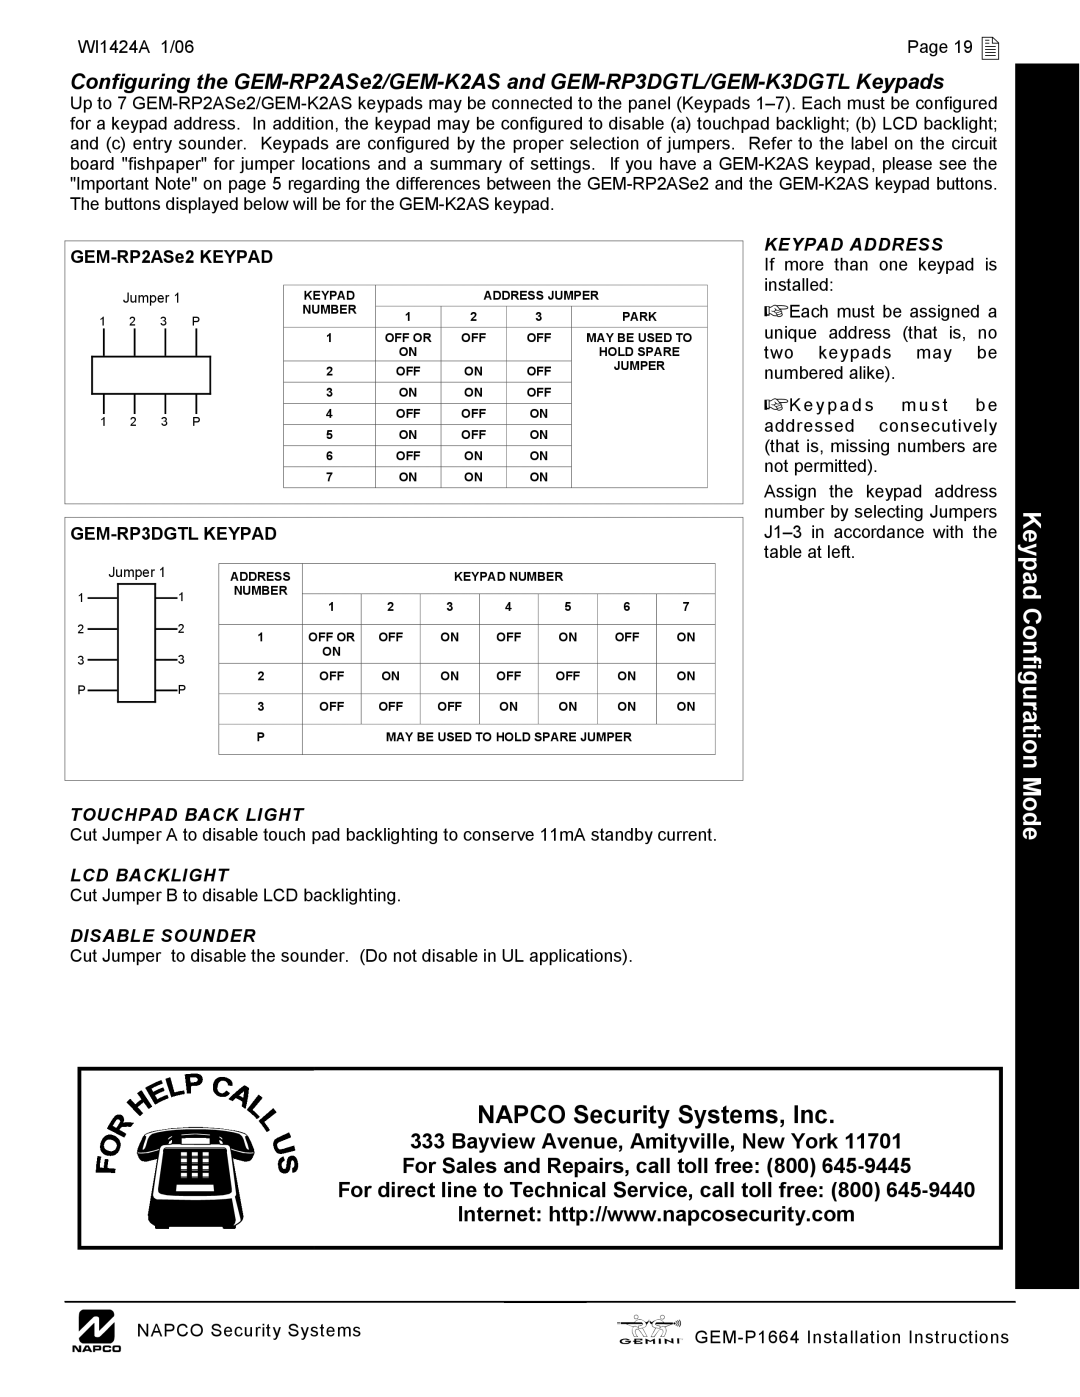 Napco Security Technologies GEM-P1664 installation instructions Keypad Configuration, NAPCO Security Systems, Inc, Mode 